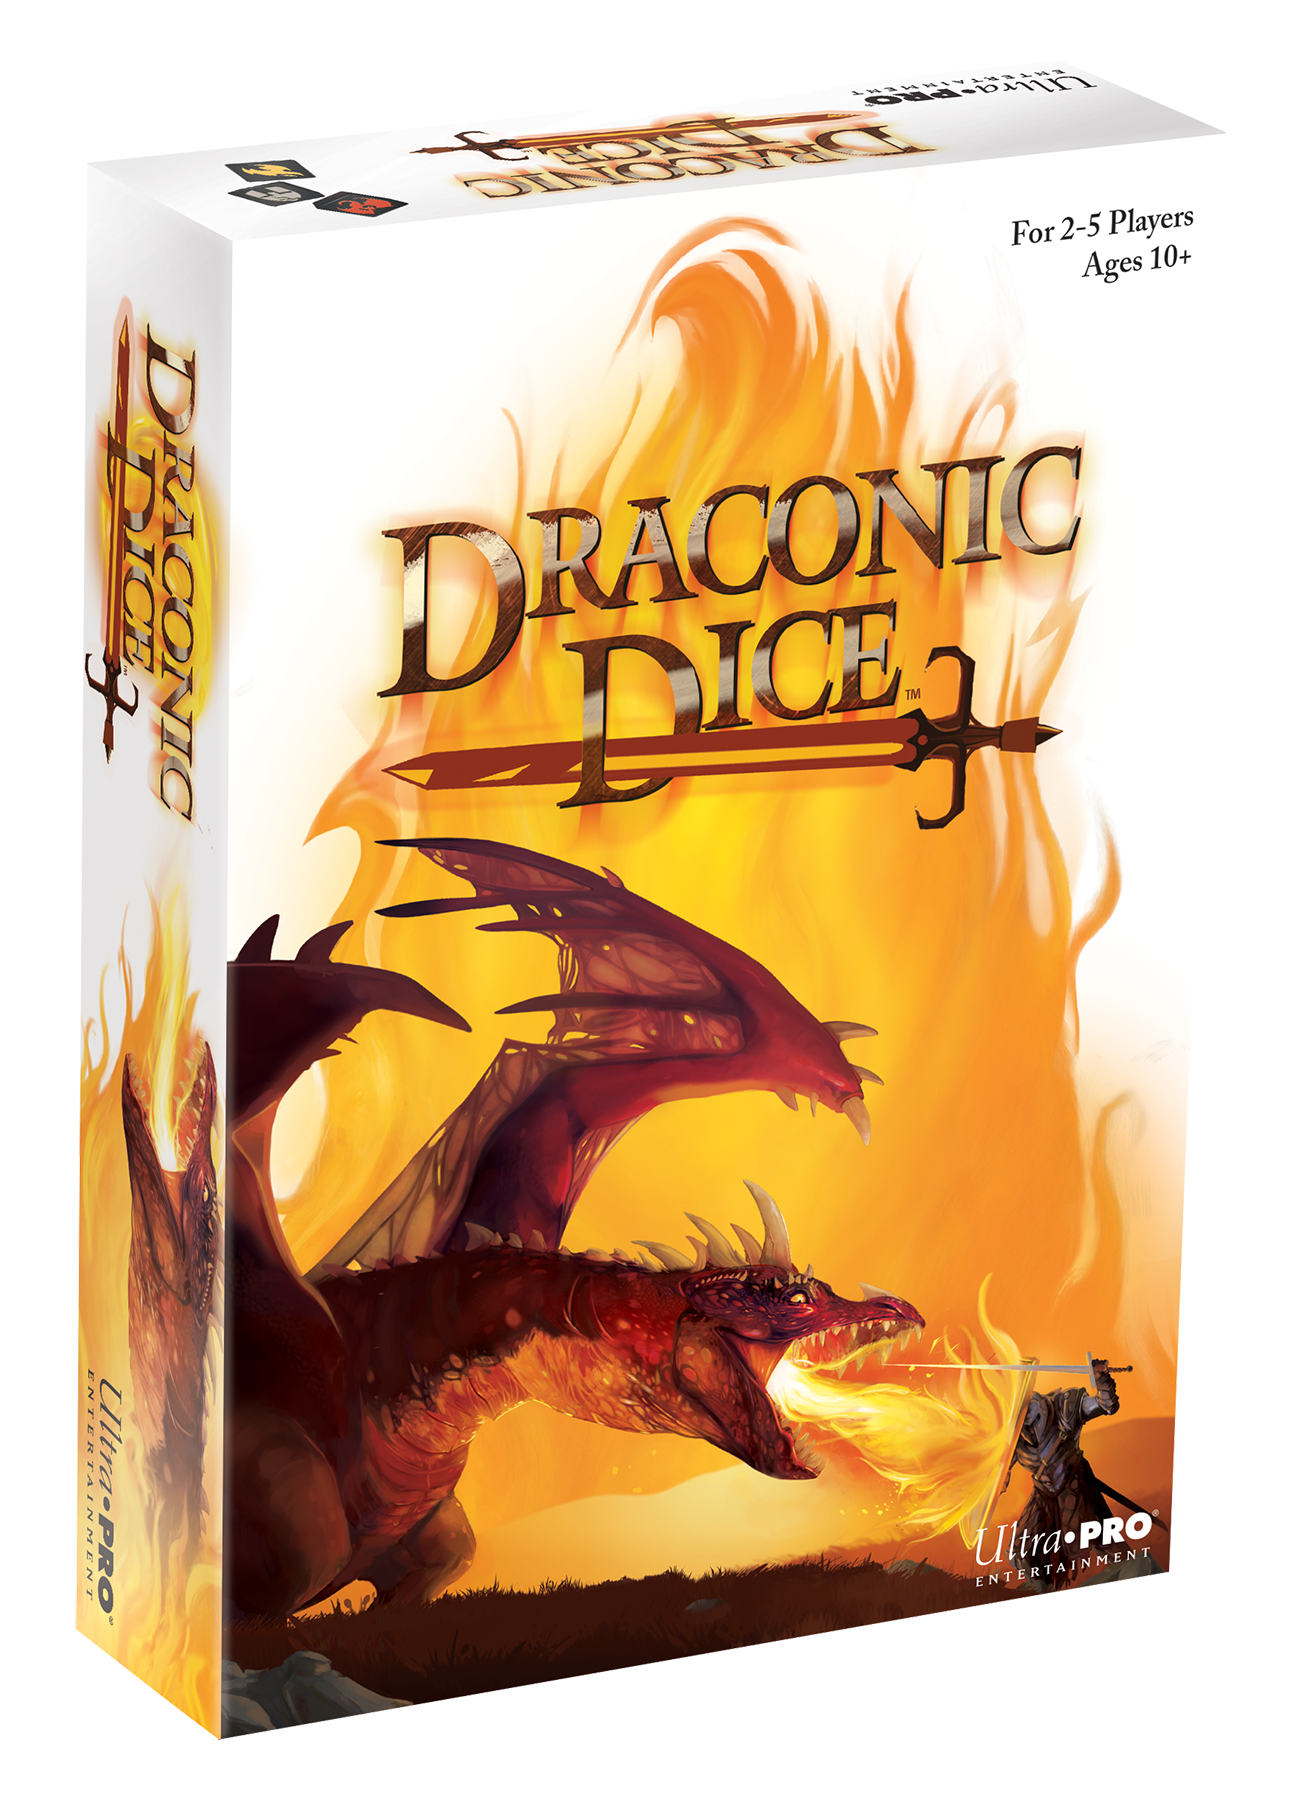 Draconic Dice product by Ultra PRO